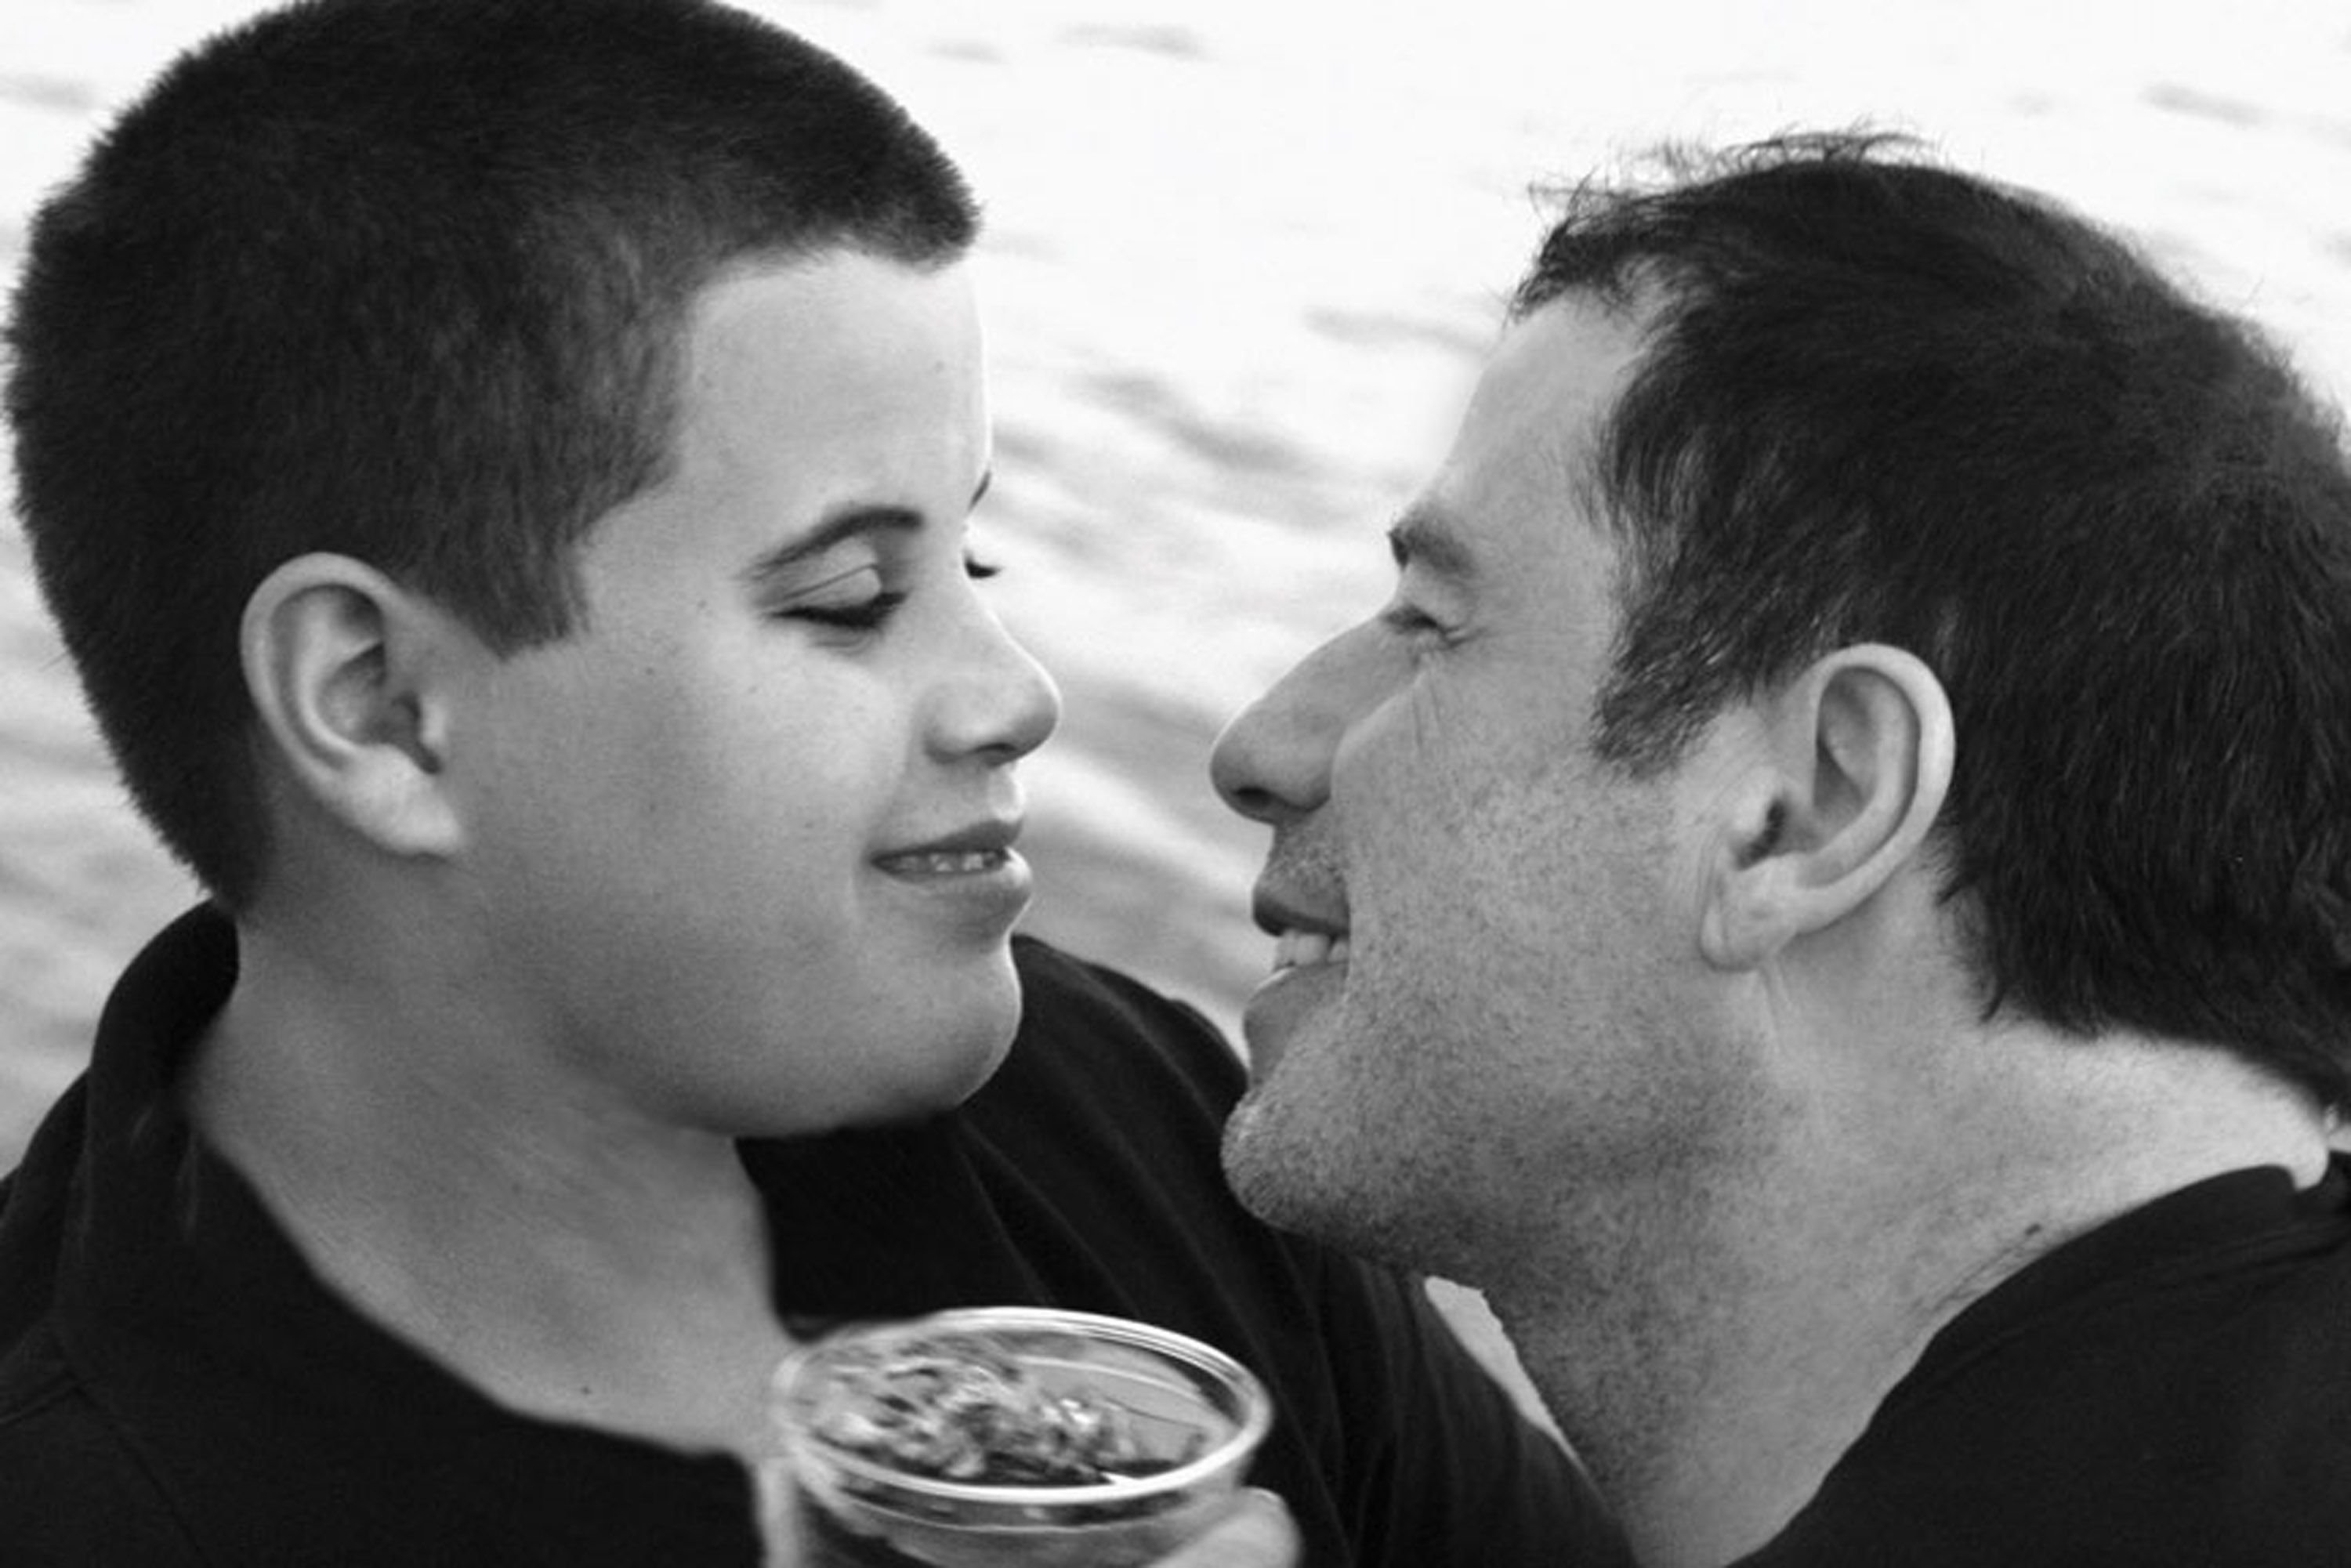 Jett Travolta (L) is seen with his father, actor John Travolta in this undated picture | Source: Getty Images